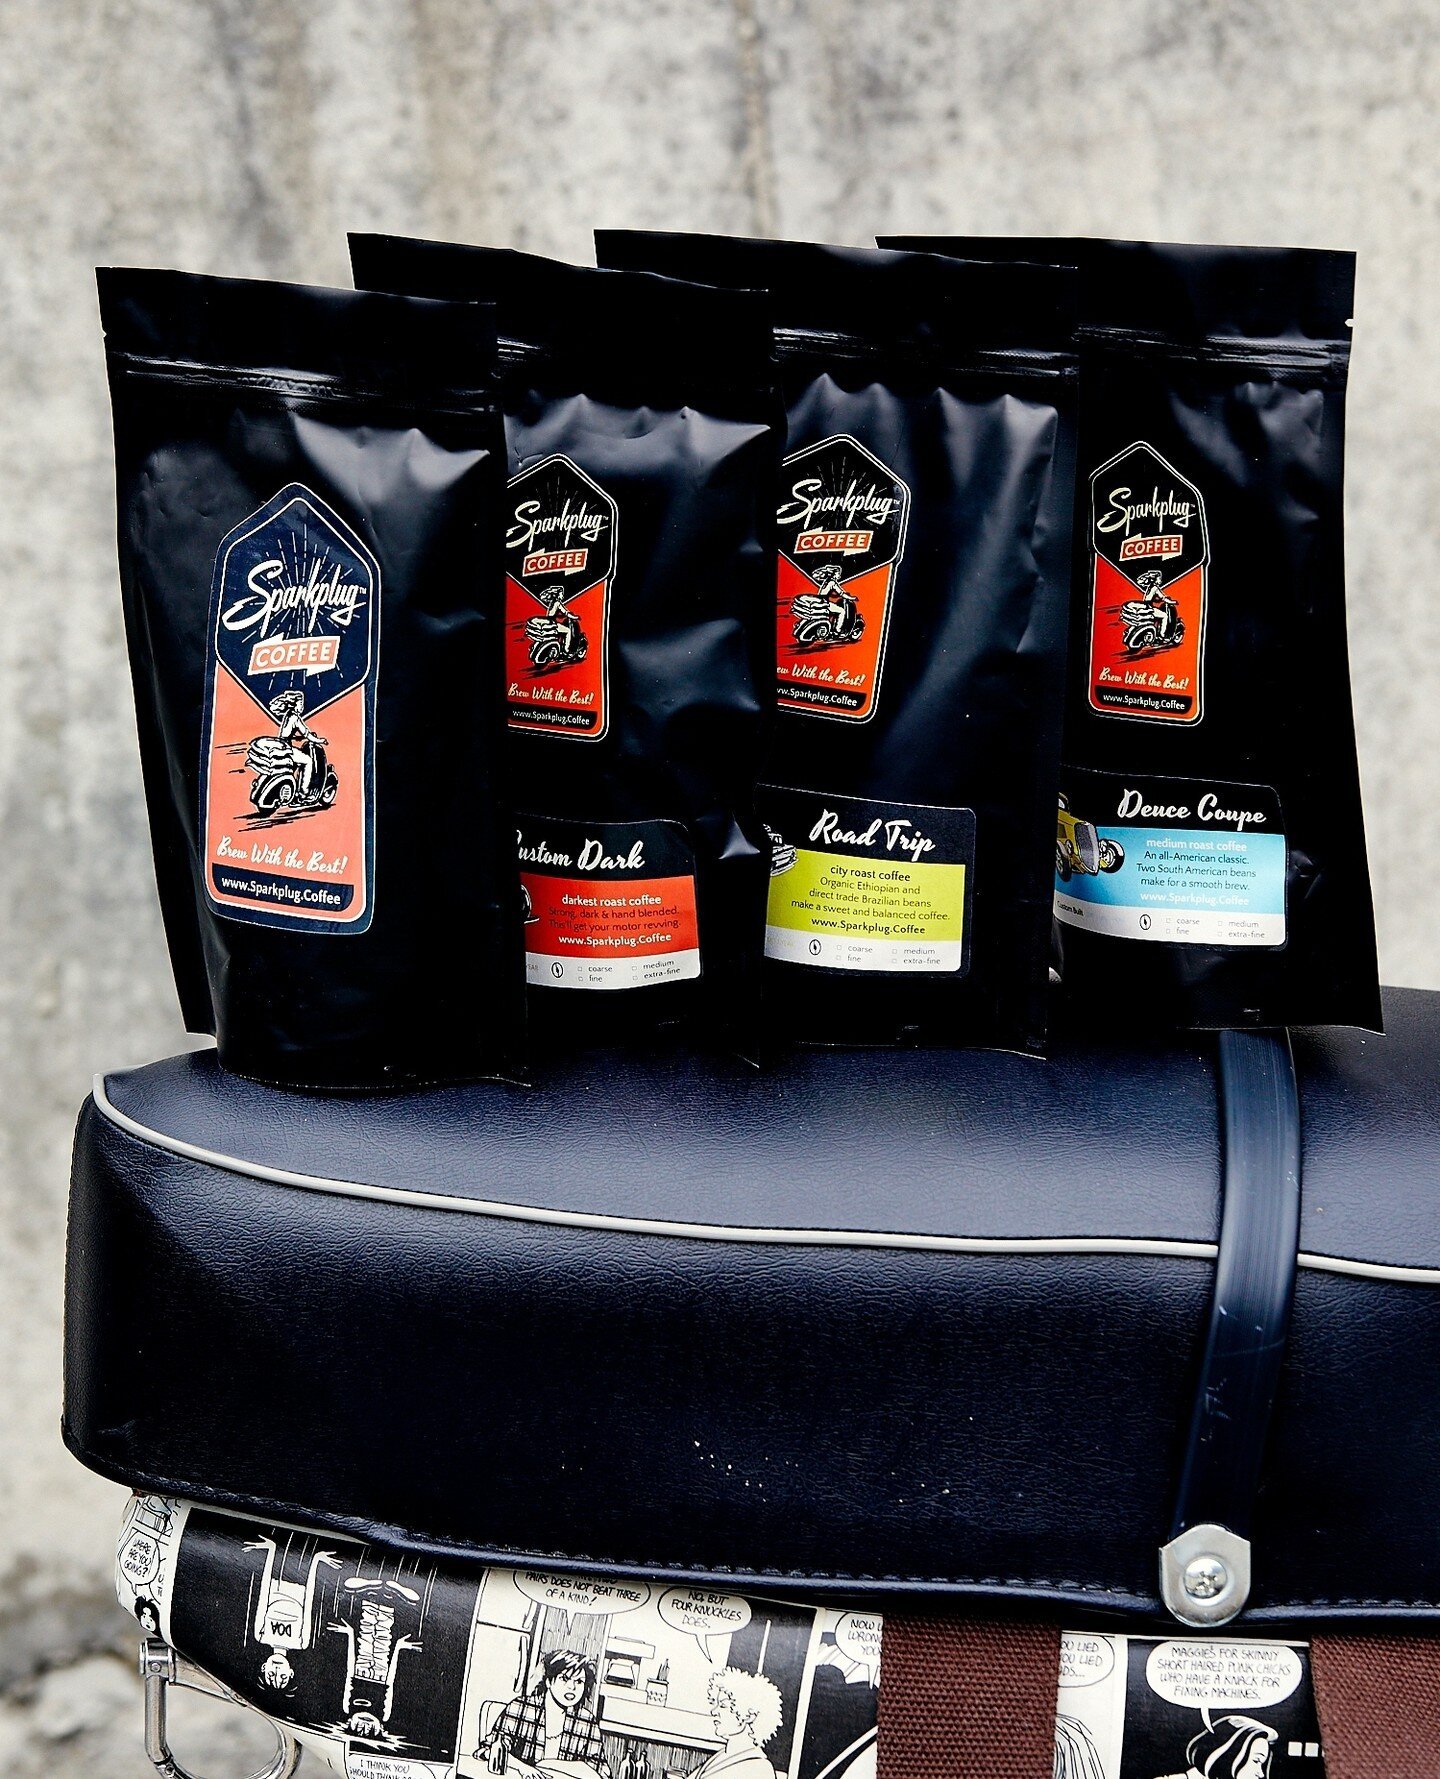 Can't decide? ⁠
⁠
DKY we have TWO awesome 'Taster Packs' to choose from!⁠
⁠
An easy way to find your favourite Sparkplug coffee!⁠
Each pack includes 4 different x 125g bags &amp; FREE Shipping⁠
⁠
⁠
+ Makes a great #GiftForCoffeeLovers... if you're no